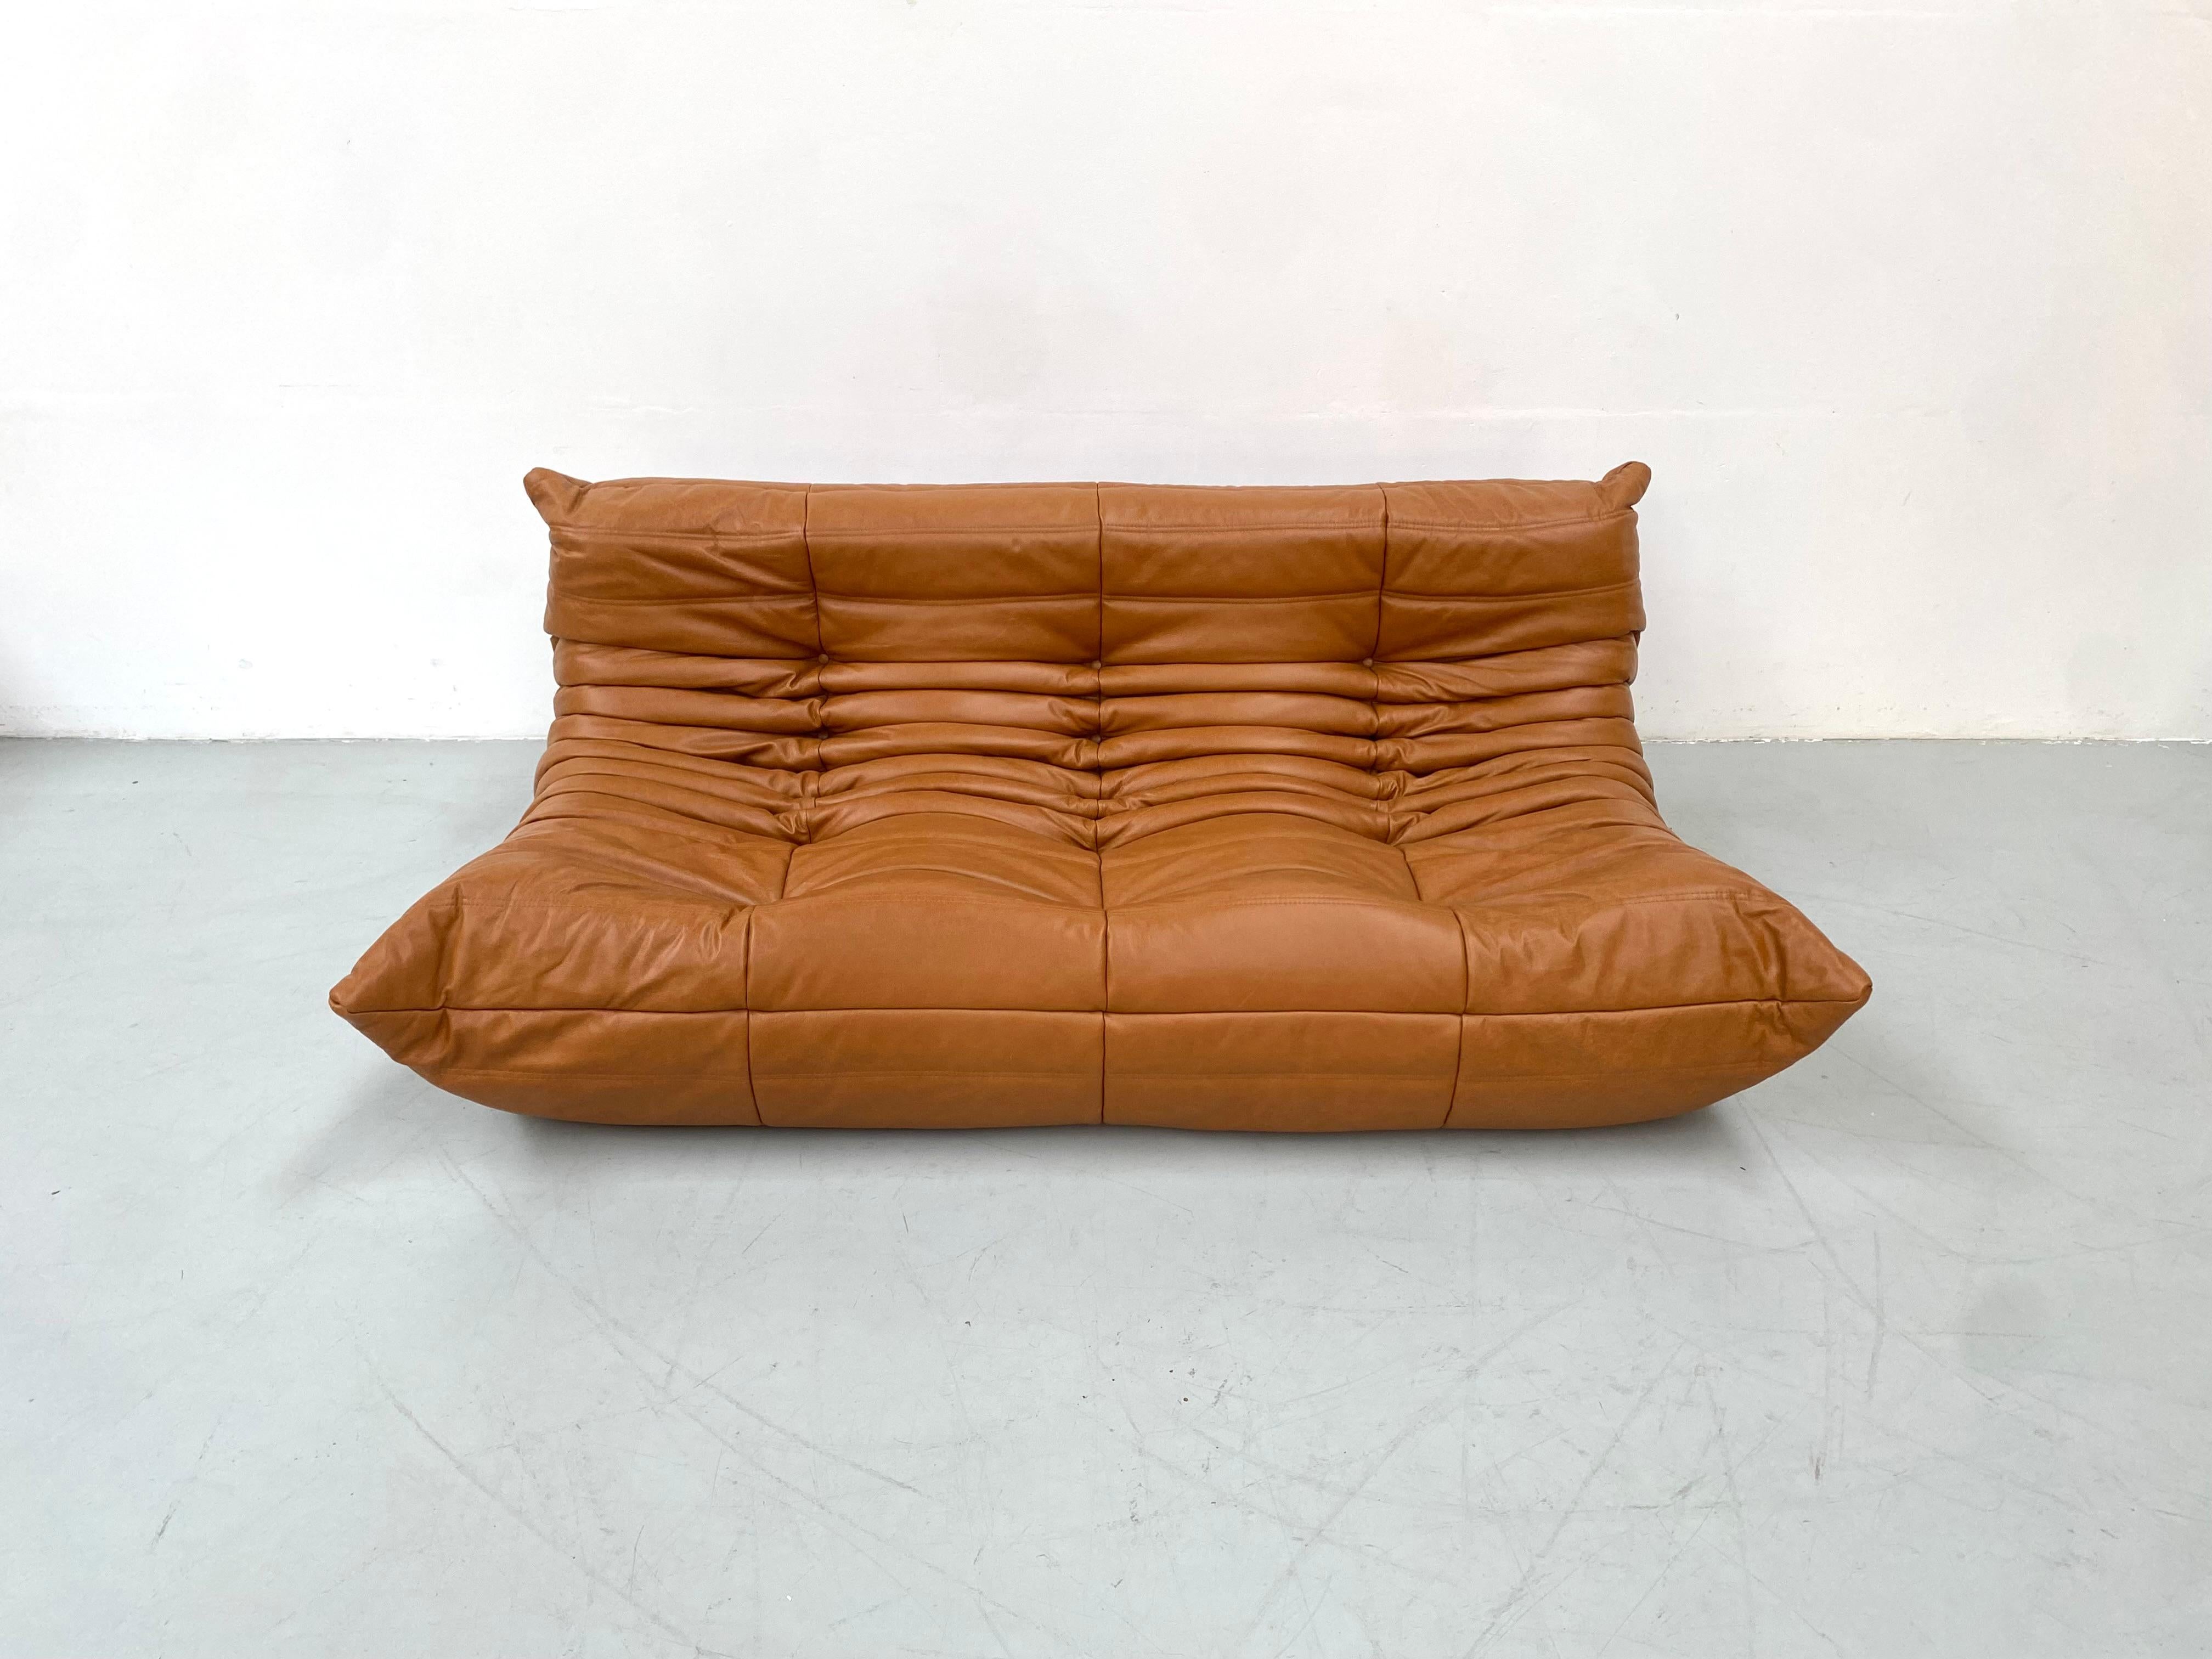 The Togo was designed by Michel Ducaroy in 1973.  It is the first sofa/chair ever made only of foam and leather. The innerwork consists of foam in 5 different densities. Manufactured by Ligne Roset in France.